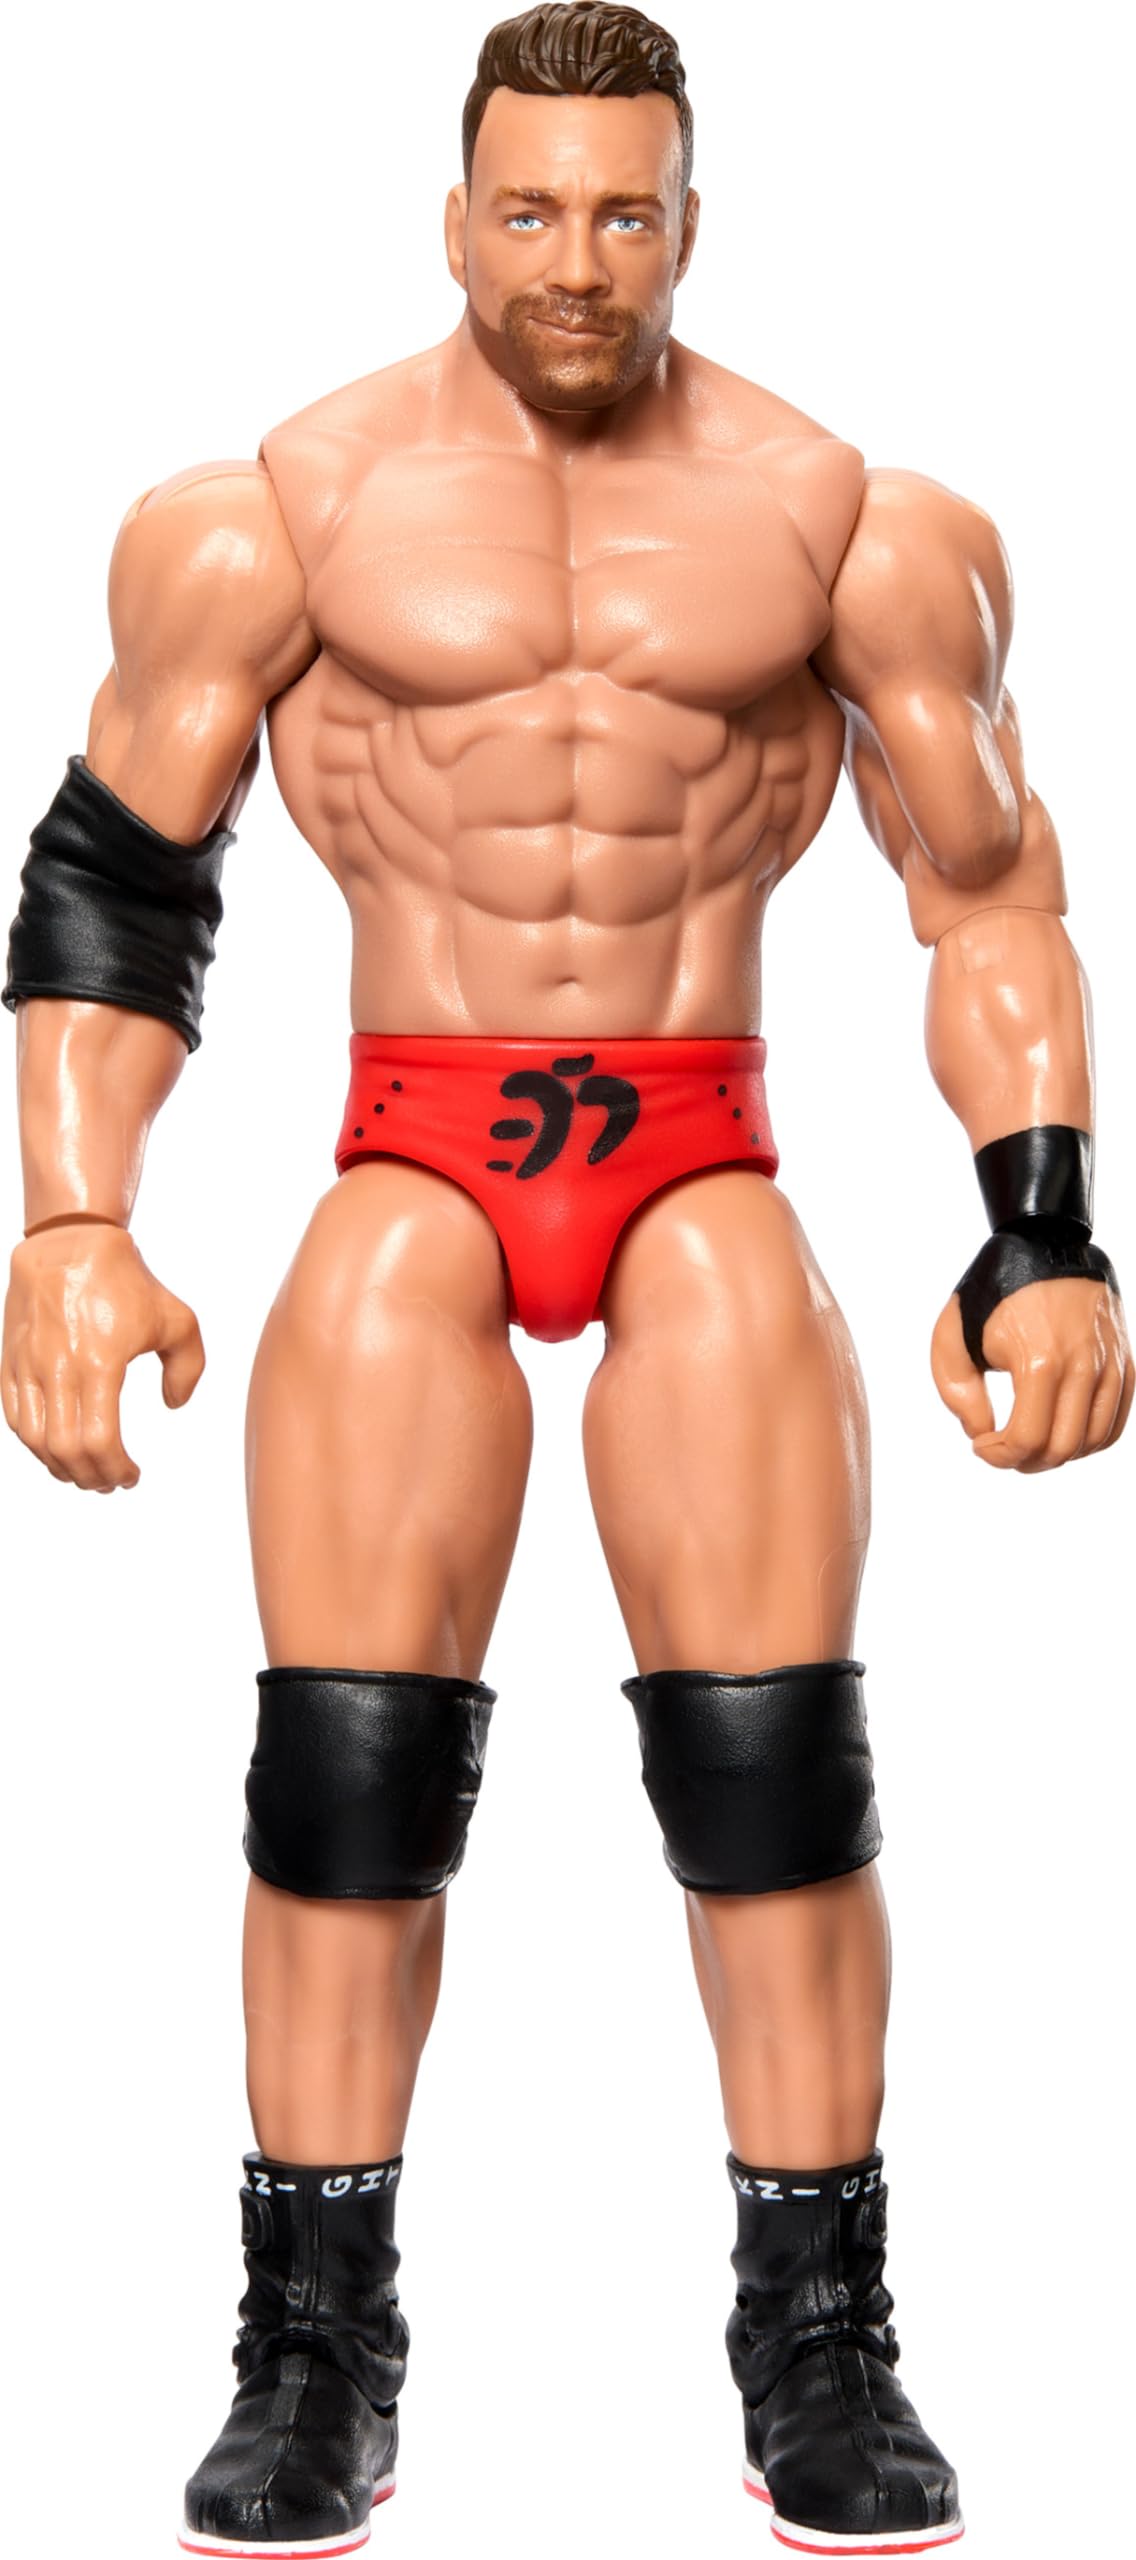 Mattel WWE Action Figure, 6-inch Collectible LA Knight with 10 Articulation Points & Life-Like Look